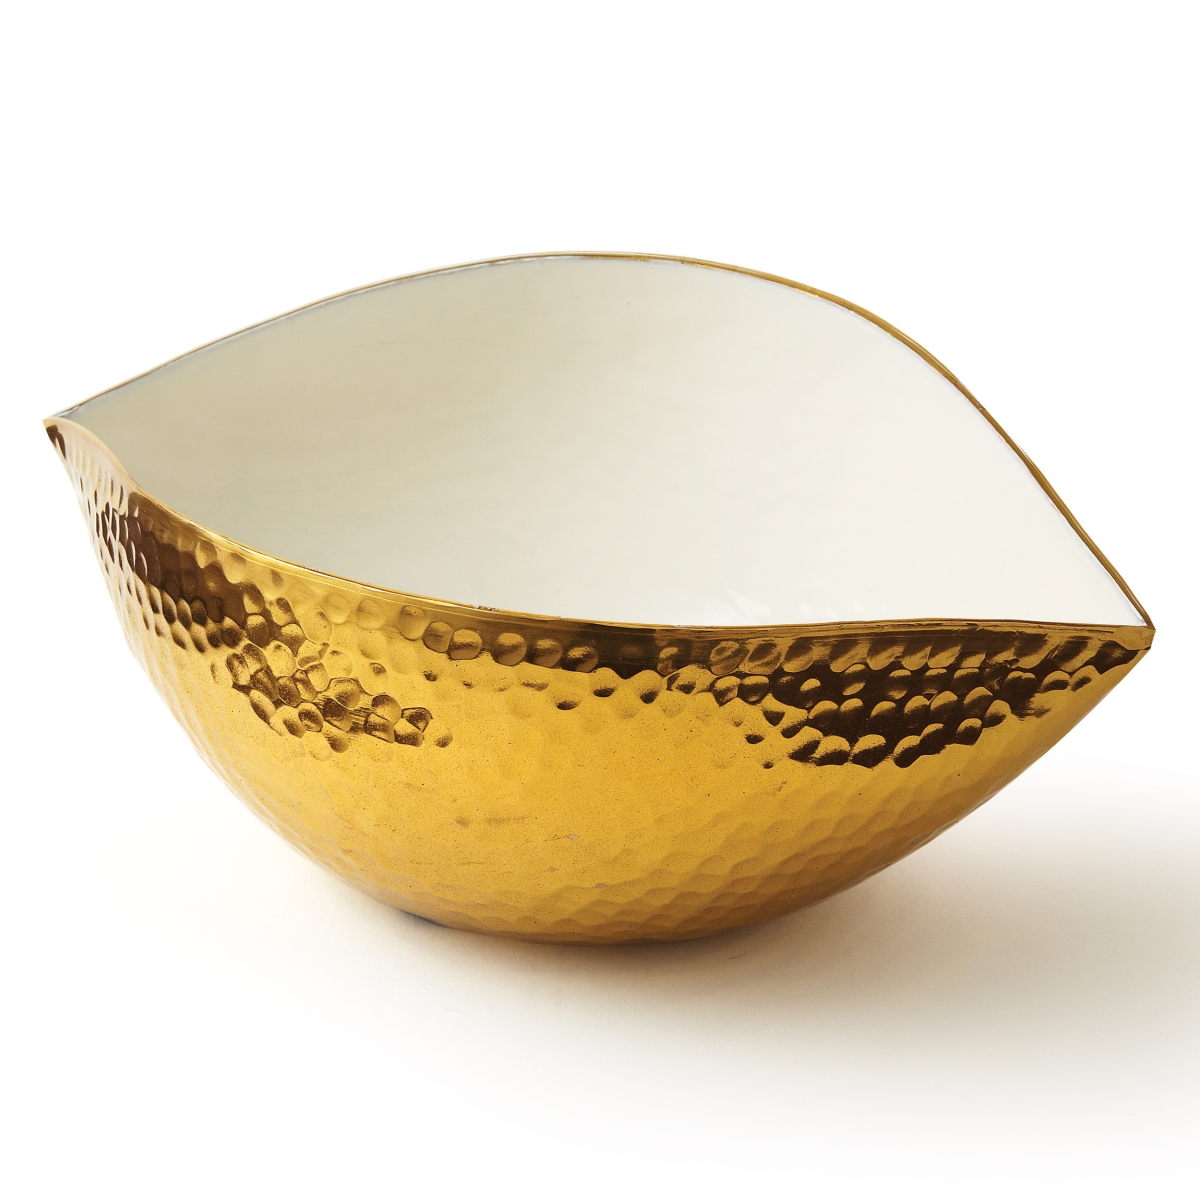 70182 8.5 X 5.5 X 3.75 In. Bethany Bowl, Gold & White